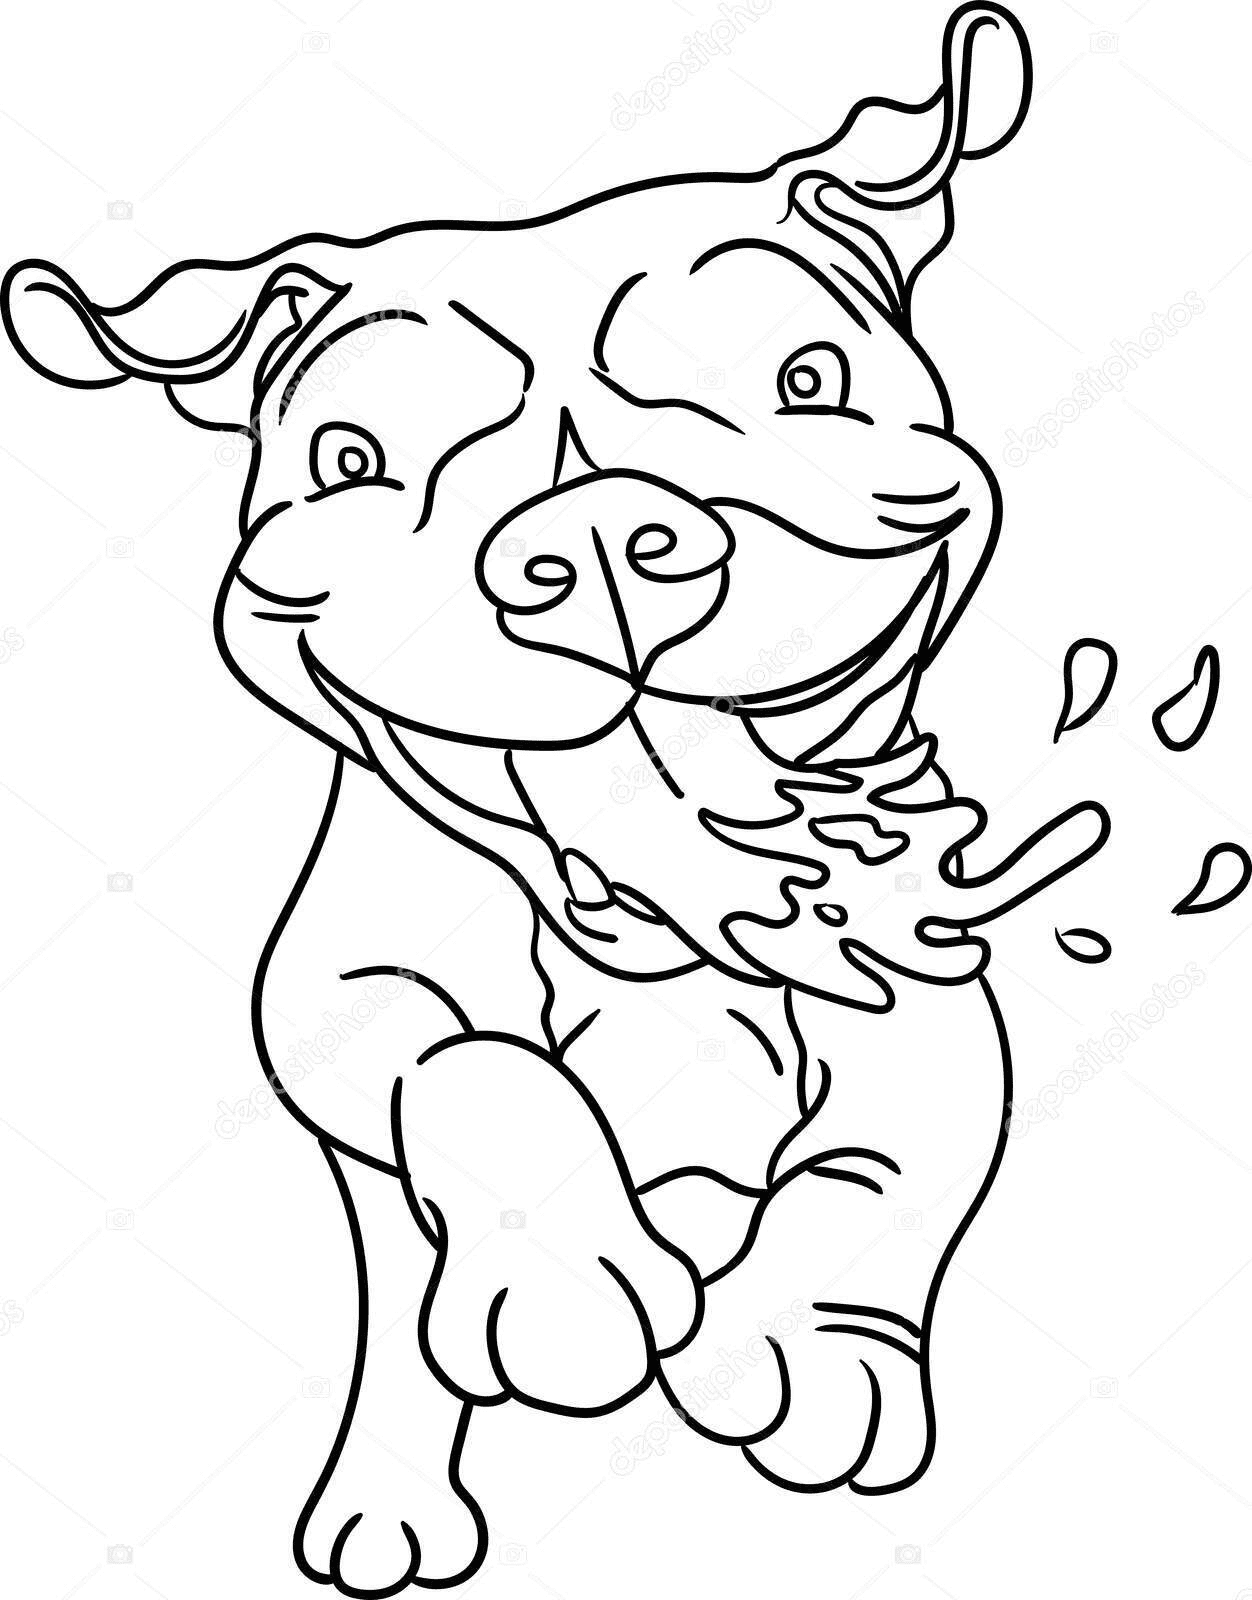 Dog Pitbull Coloring Pages